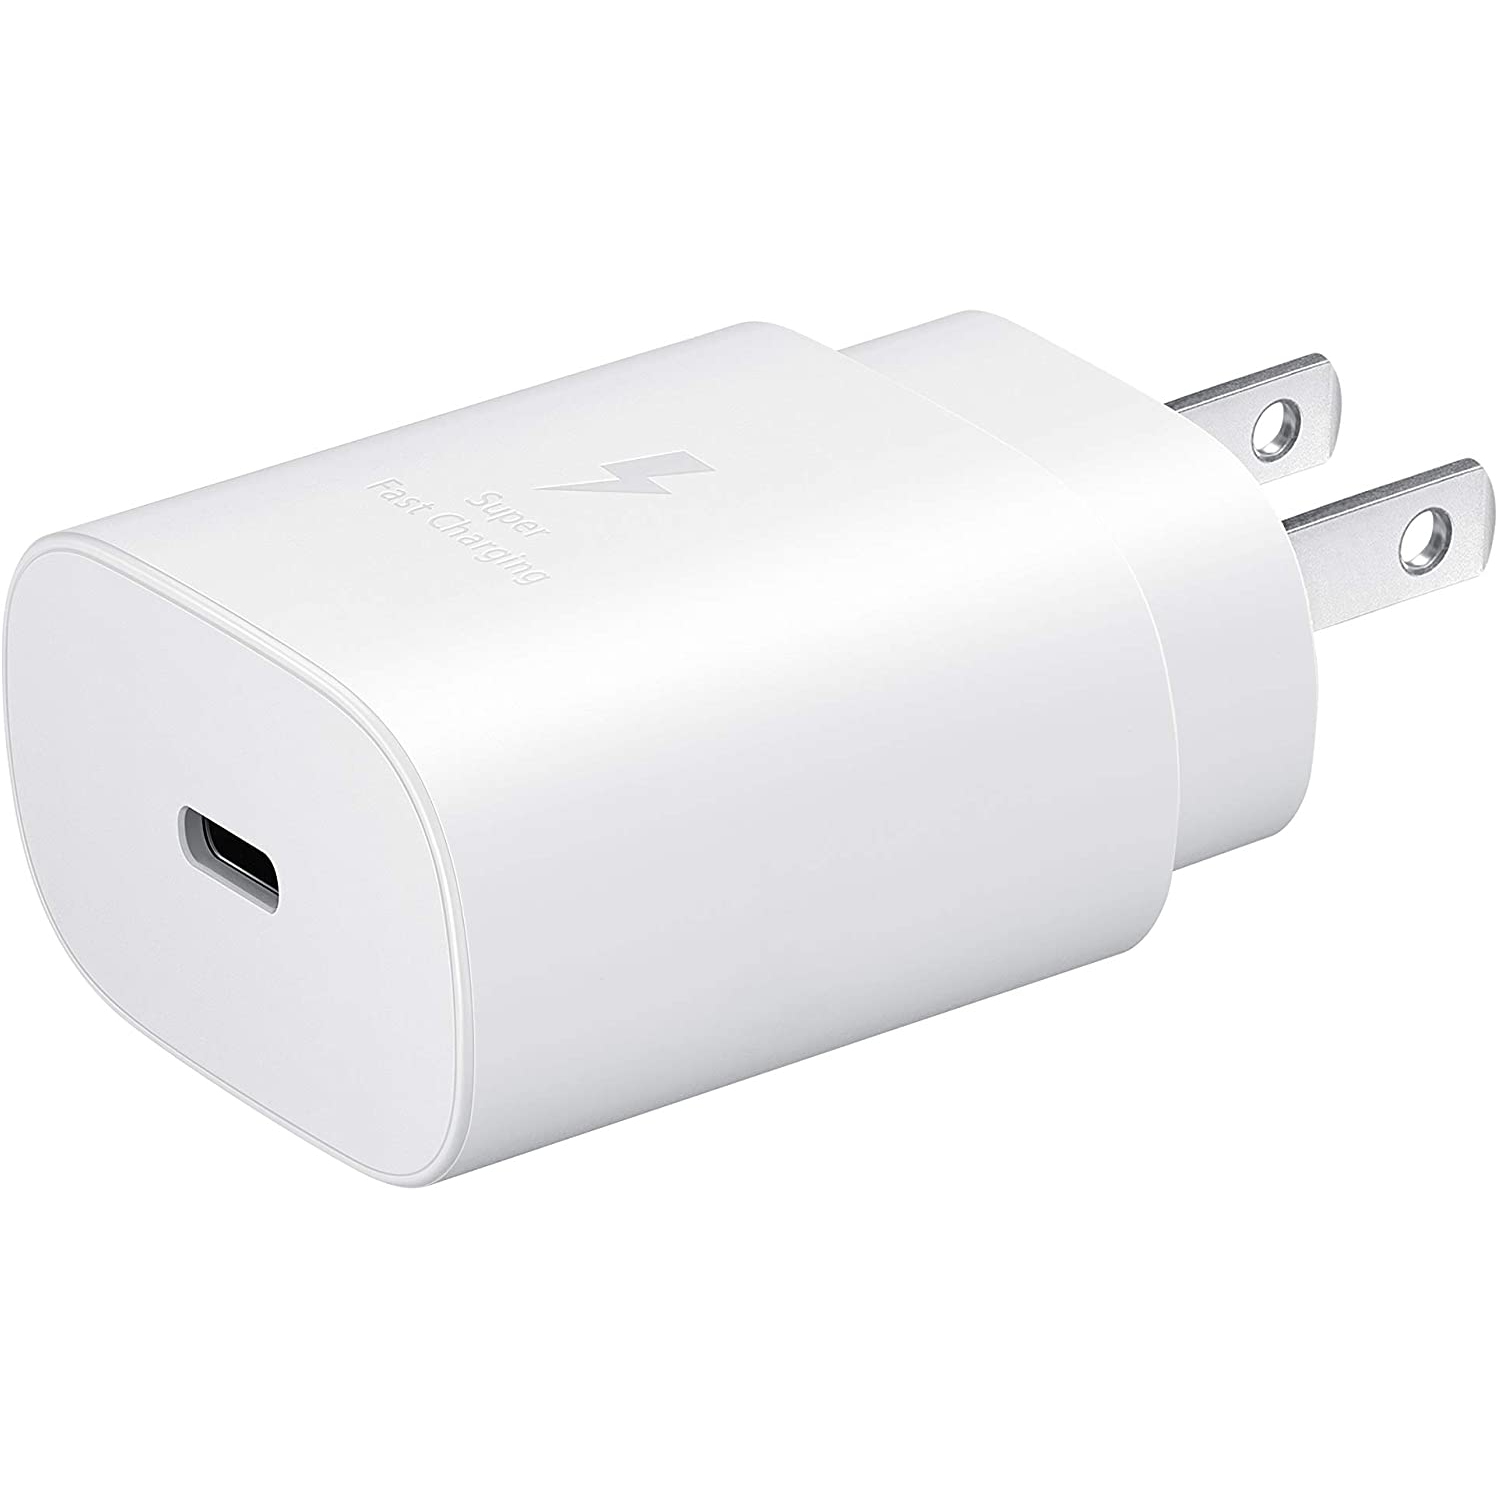 25W USB-C 3.0A Fast Charging Wall Charger Adapter for Samsung Galaxy S9 S10 S20 Note 9 10 Plus, White